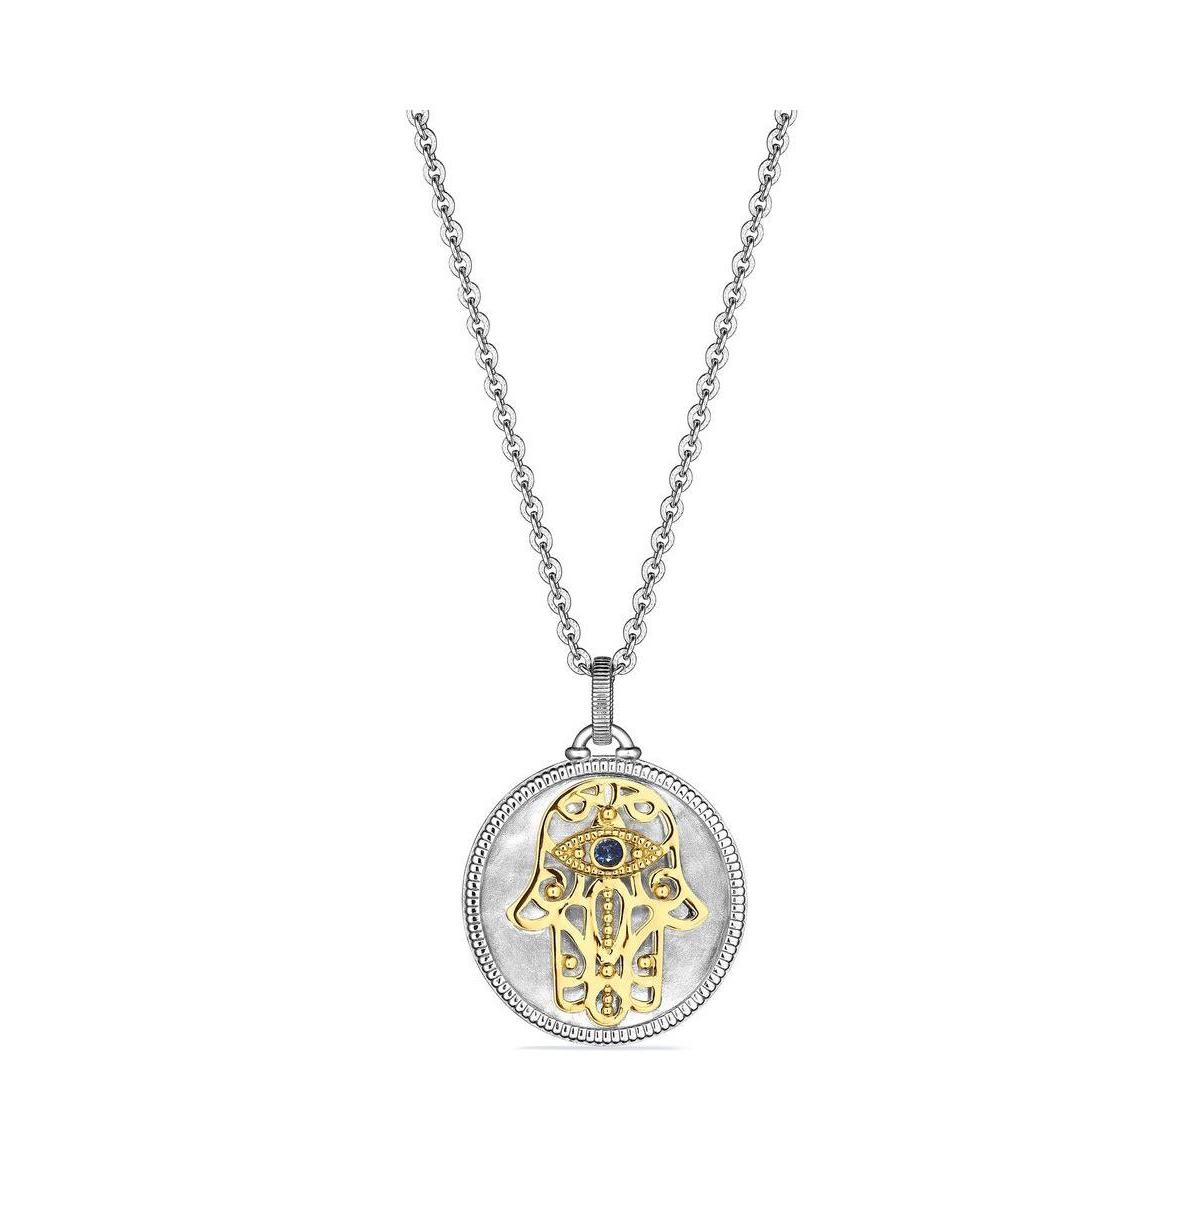 Little Luxuries Long Hamsa Medallion Necklace with Blue Sapphire, Diamonds and 18K Gold - Silver/gold